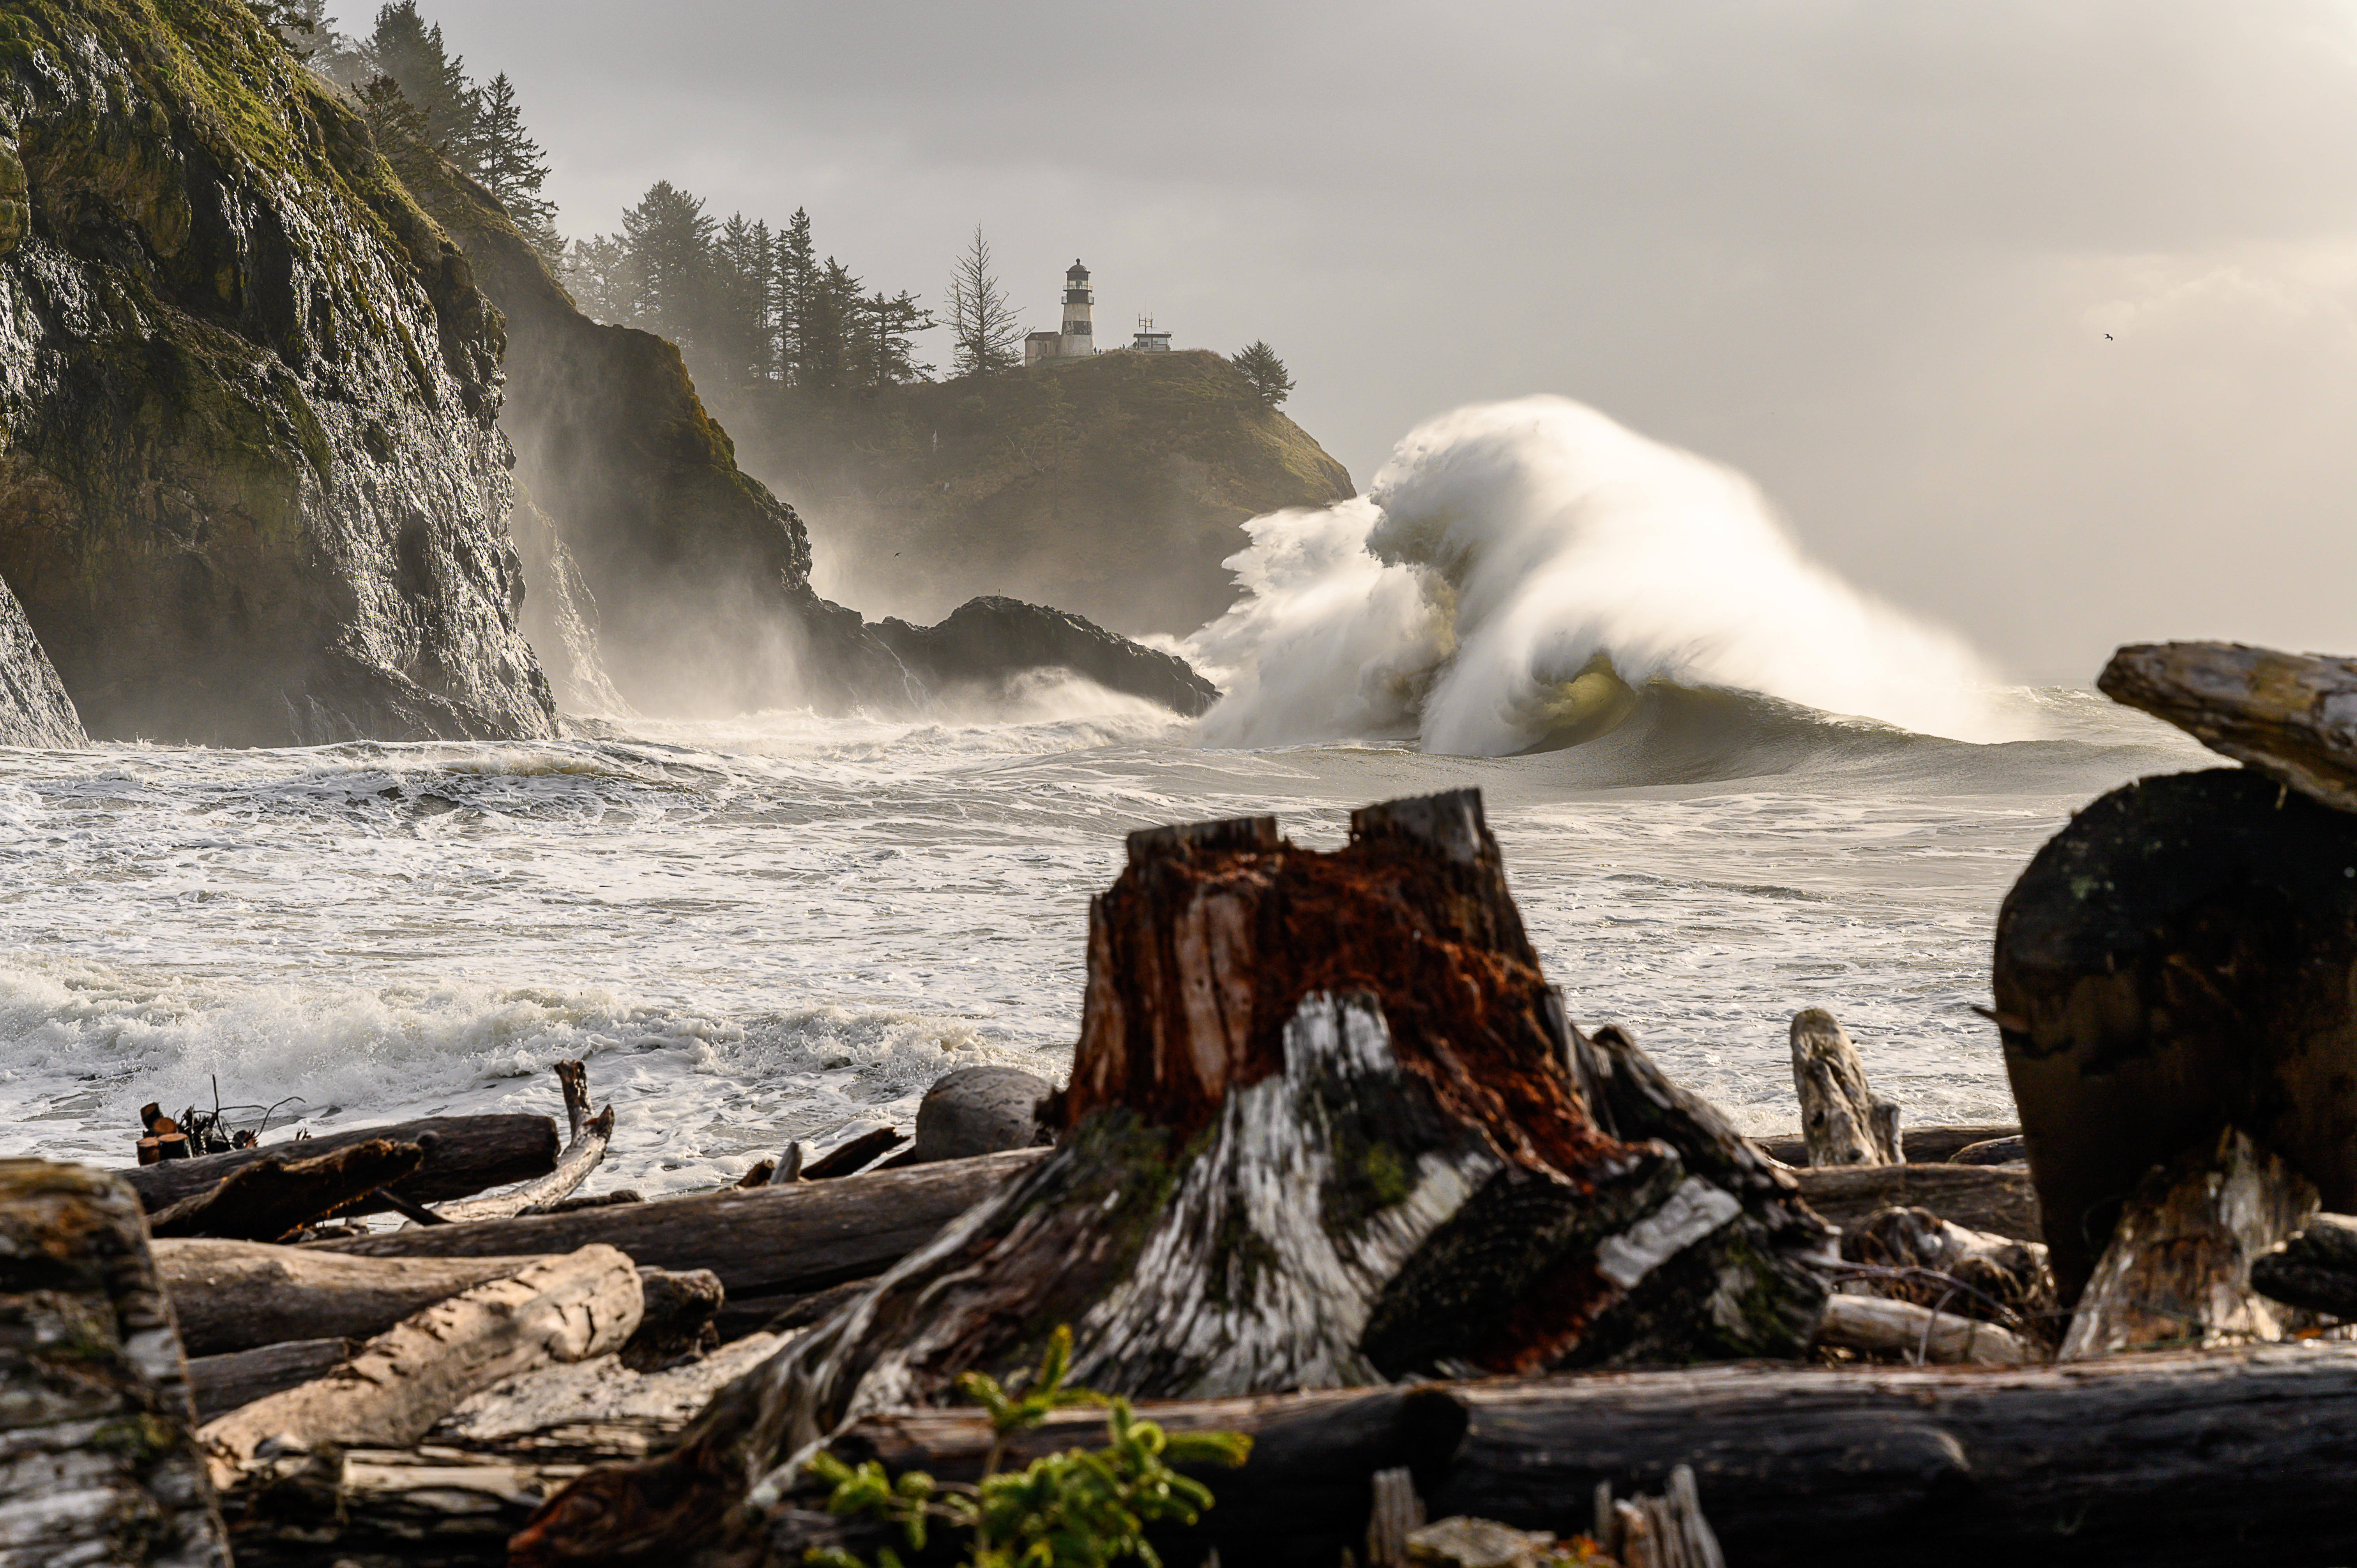 A huge wave crashes on a rocky cliff in the background, with driftwood in the foreground